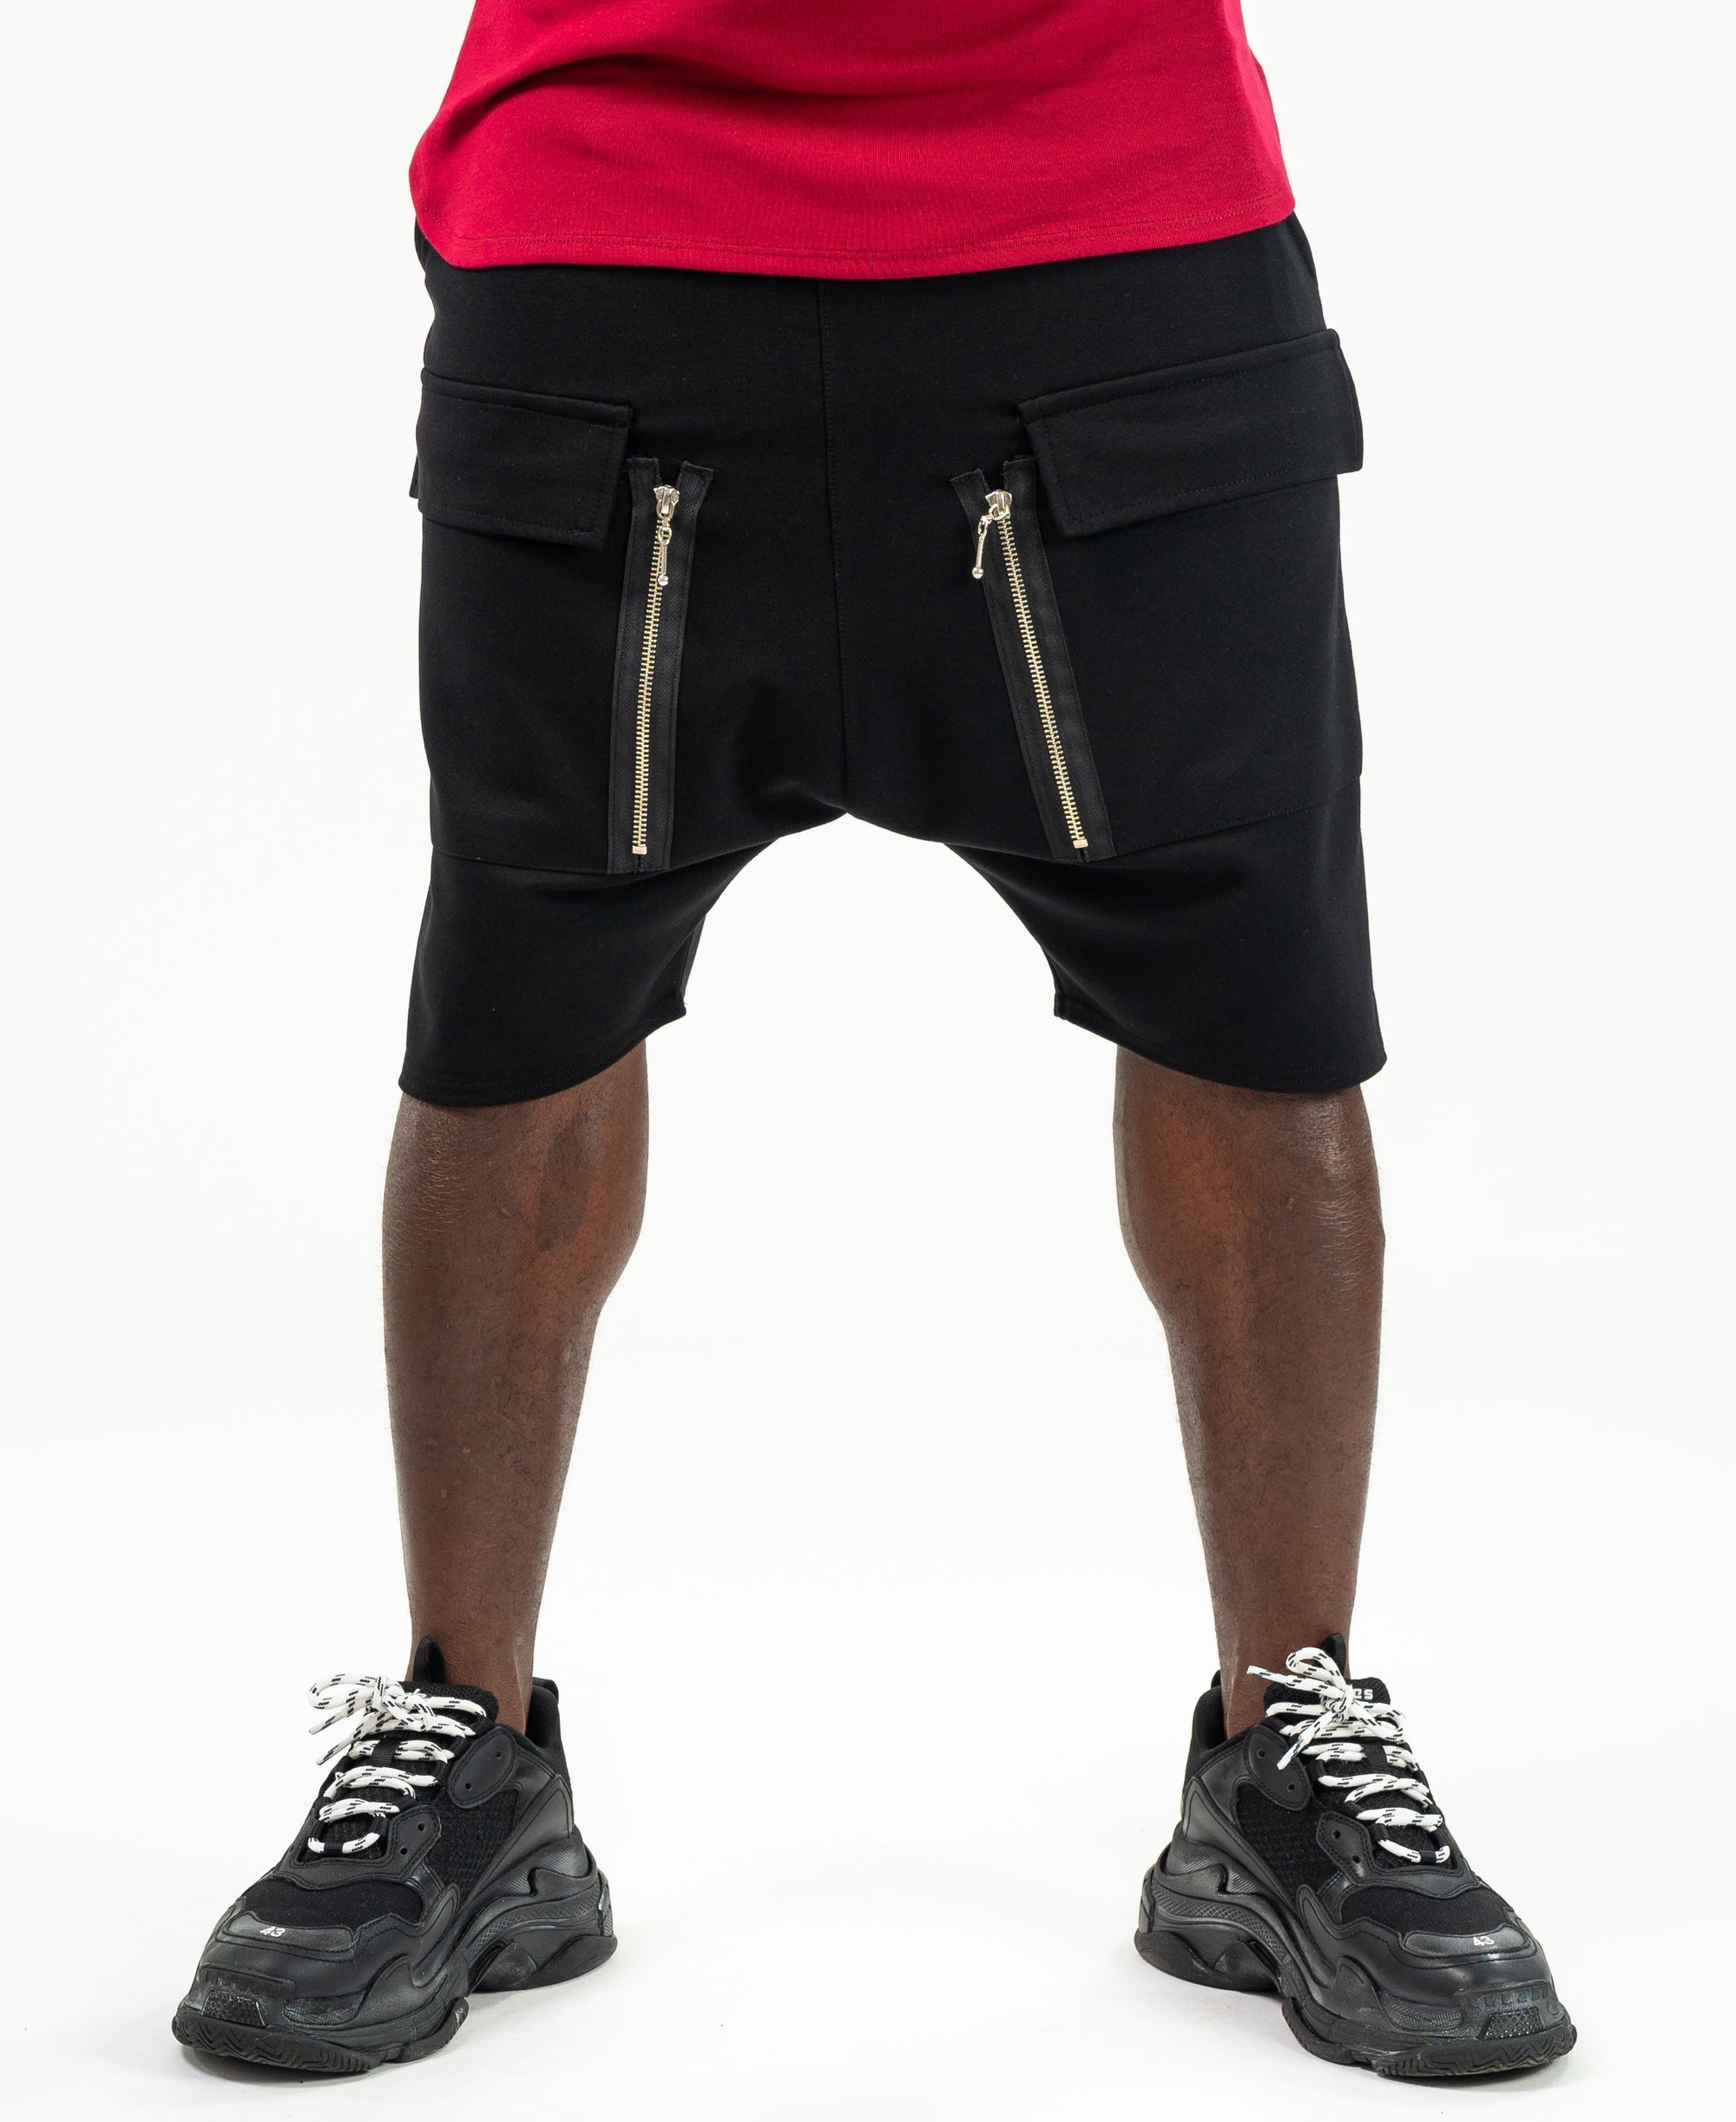 Short Black Trousers with silver zip - Fatai Style